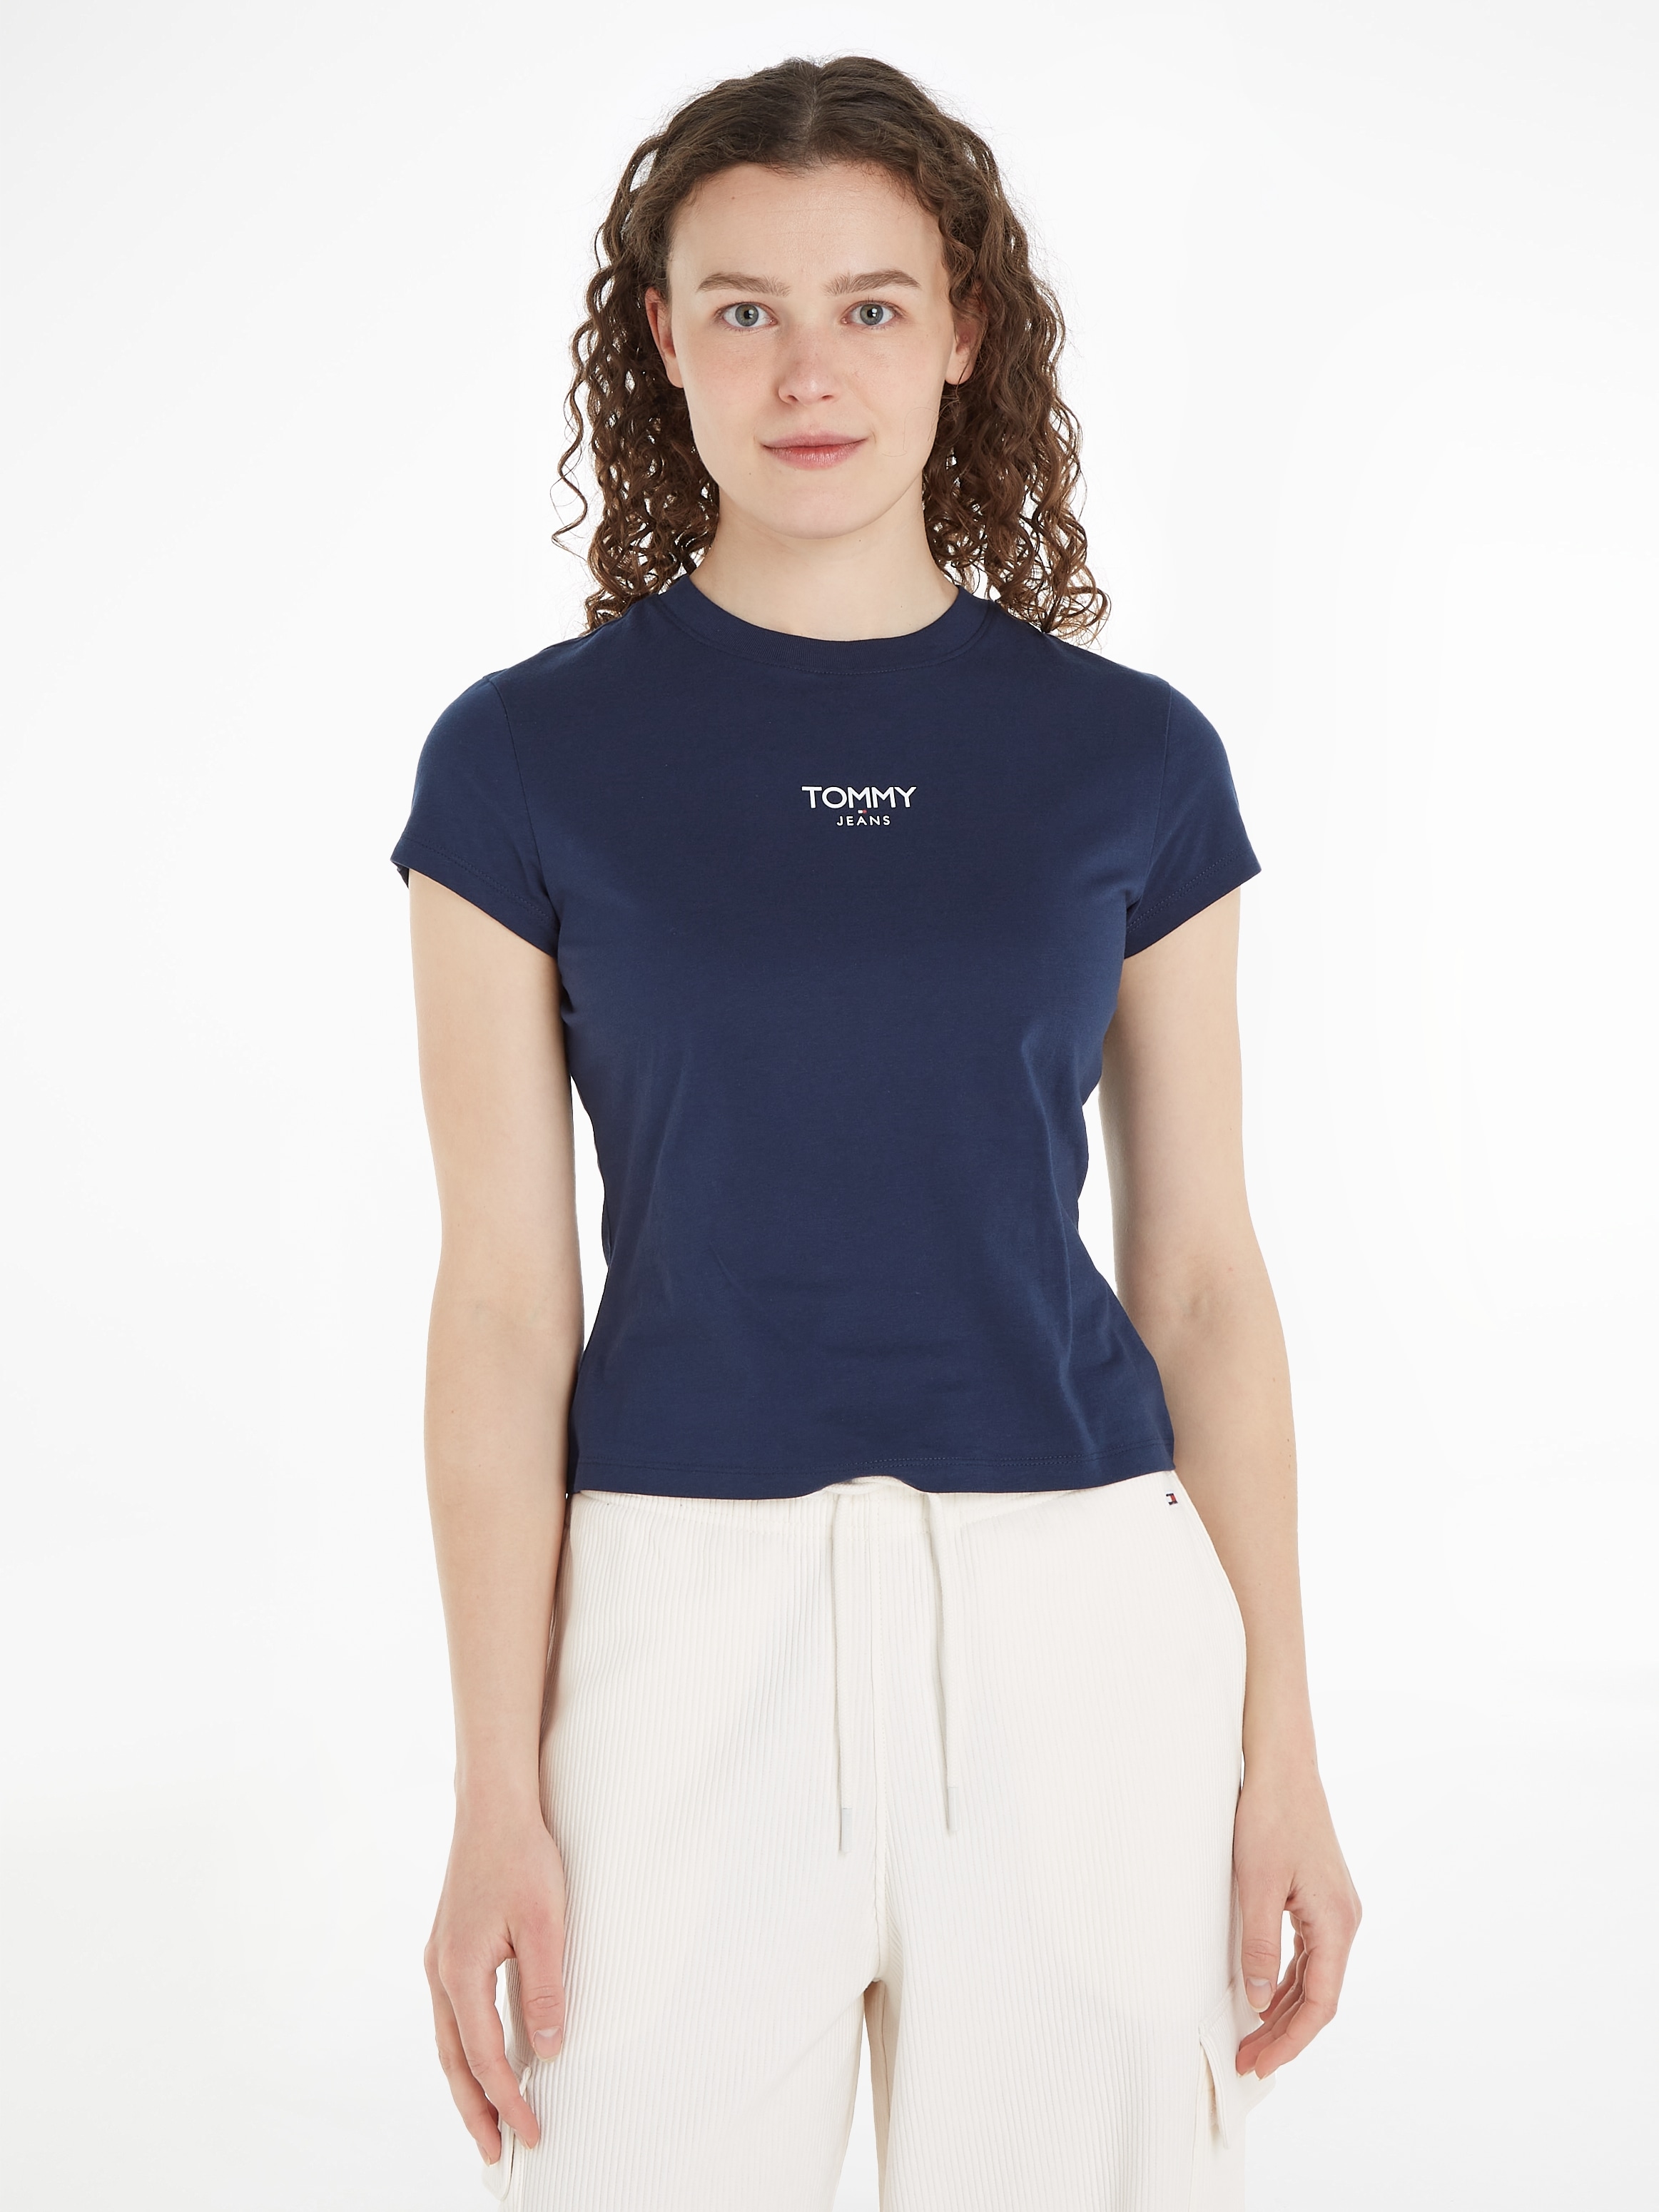 Tommy Jeans T-Shirt »TJW BBY ESSENTIAL LOGO 1 SS«, mit Tommy Jeans Logo bei  OTTOversand | T-Shirts